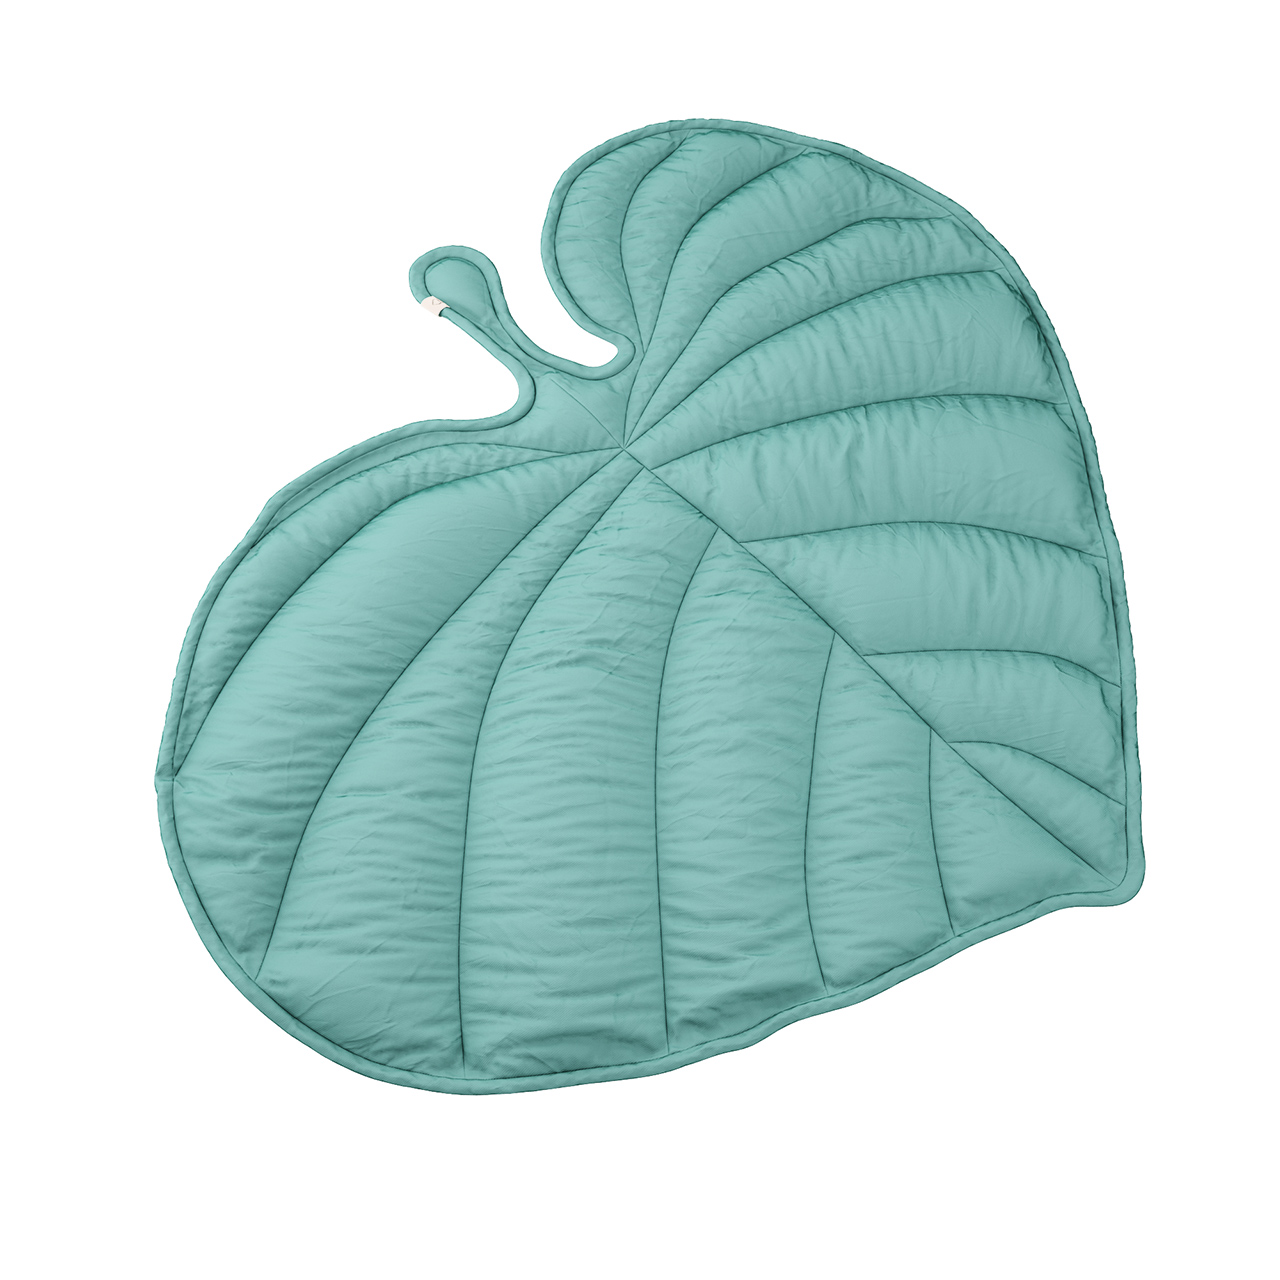 Leaf Play Mat Mint Green by Nofred